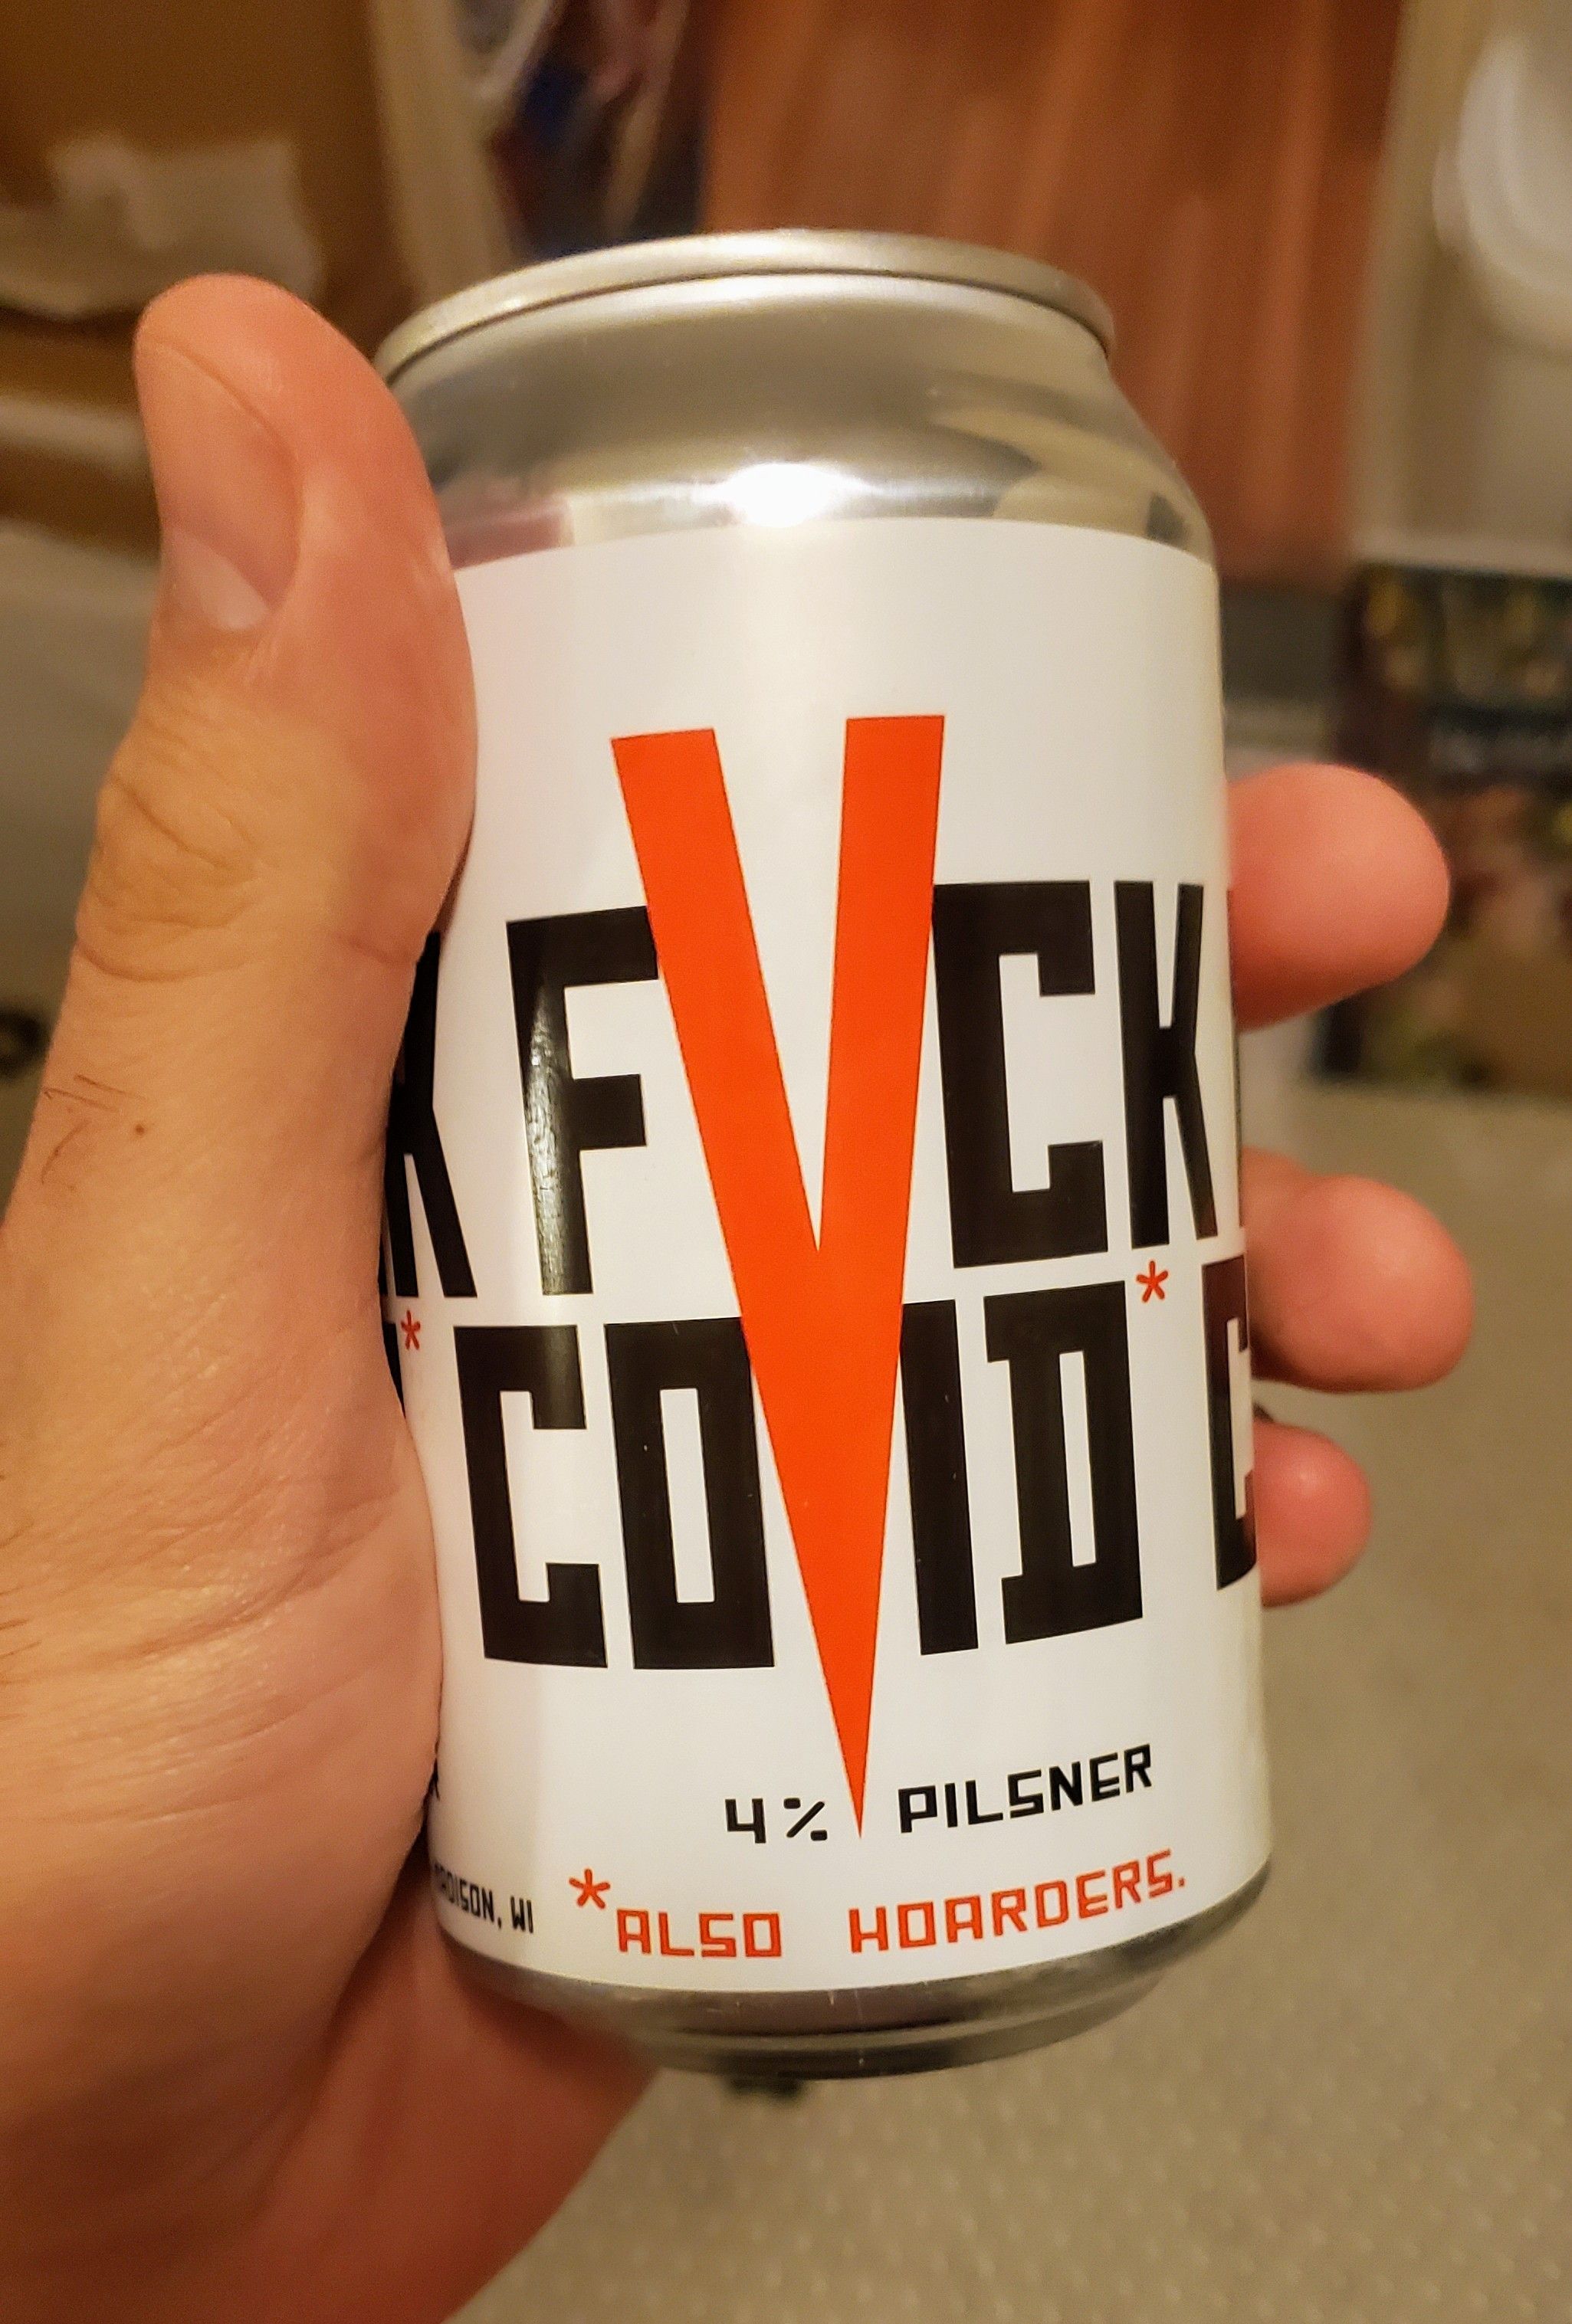 Local brewery just started selling this...